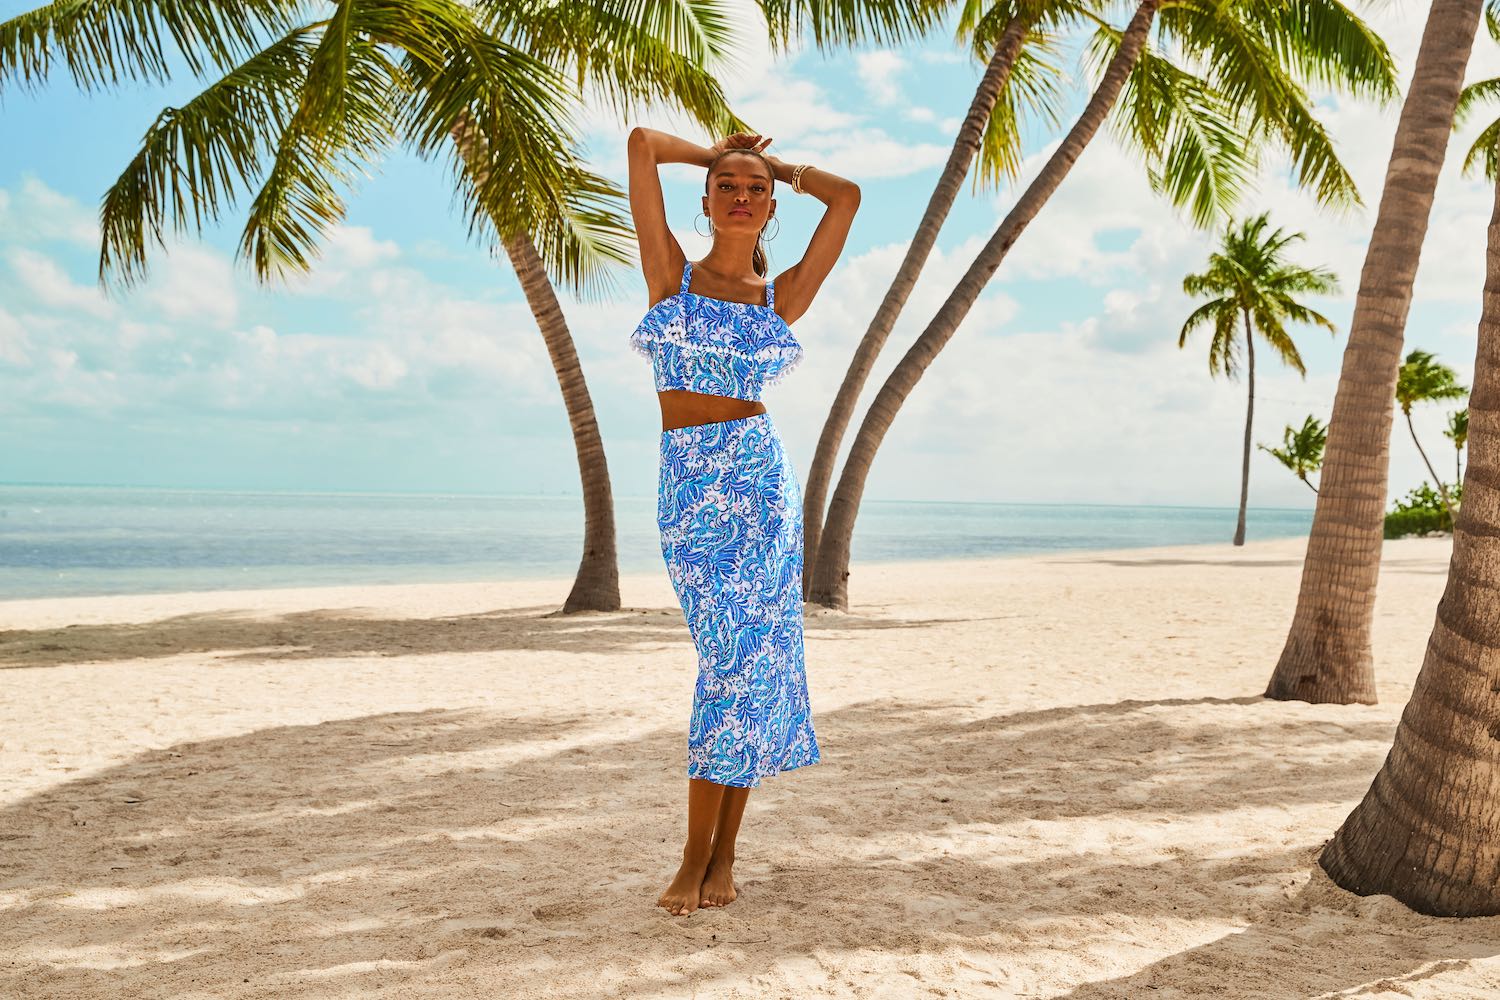 person in brightly colored crop top and long skirt standing on a beach with palm trees in the background